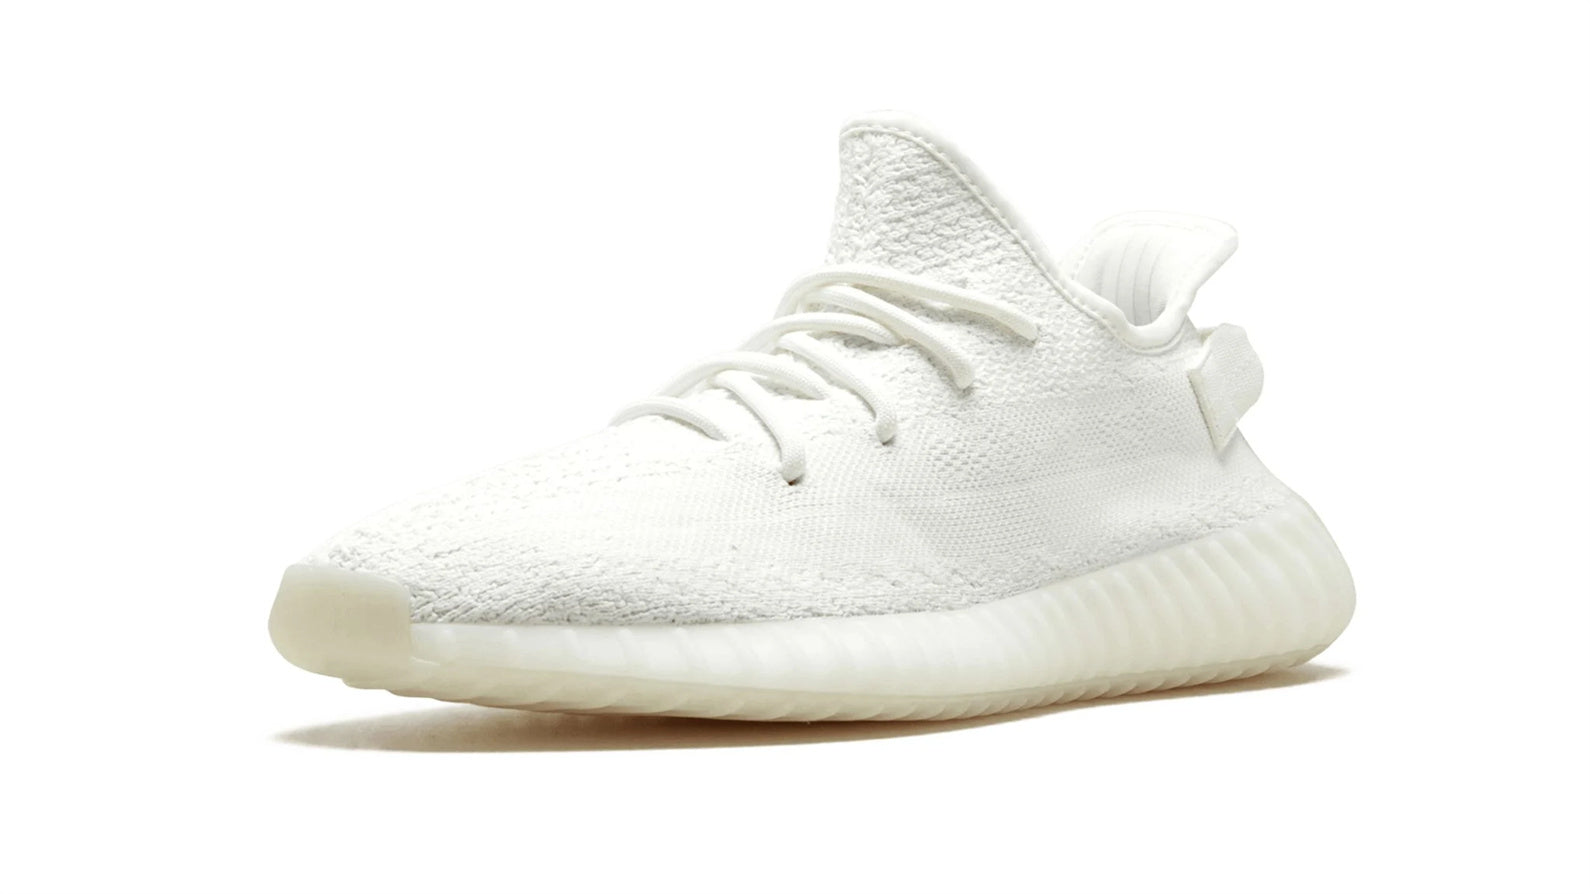 adidas Yeezy Boost 350 V2 Cream CP9366 2018 Release Date - Sneaker